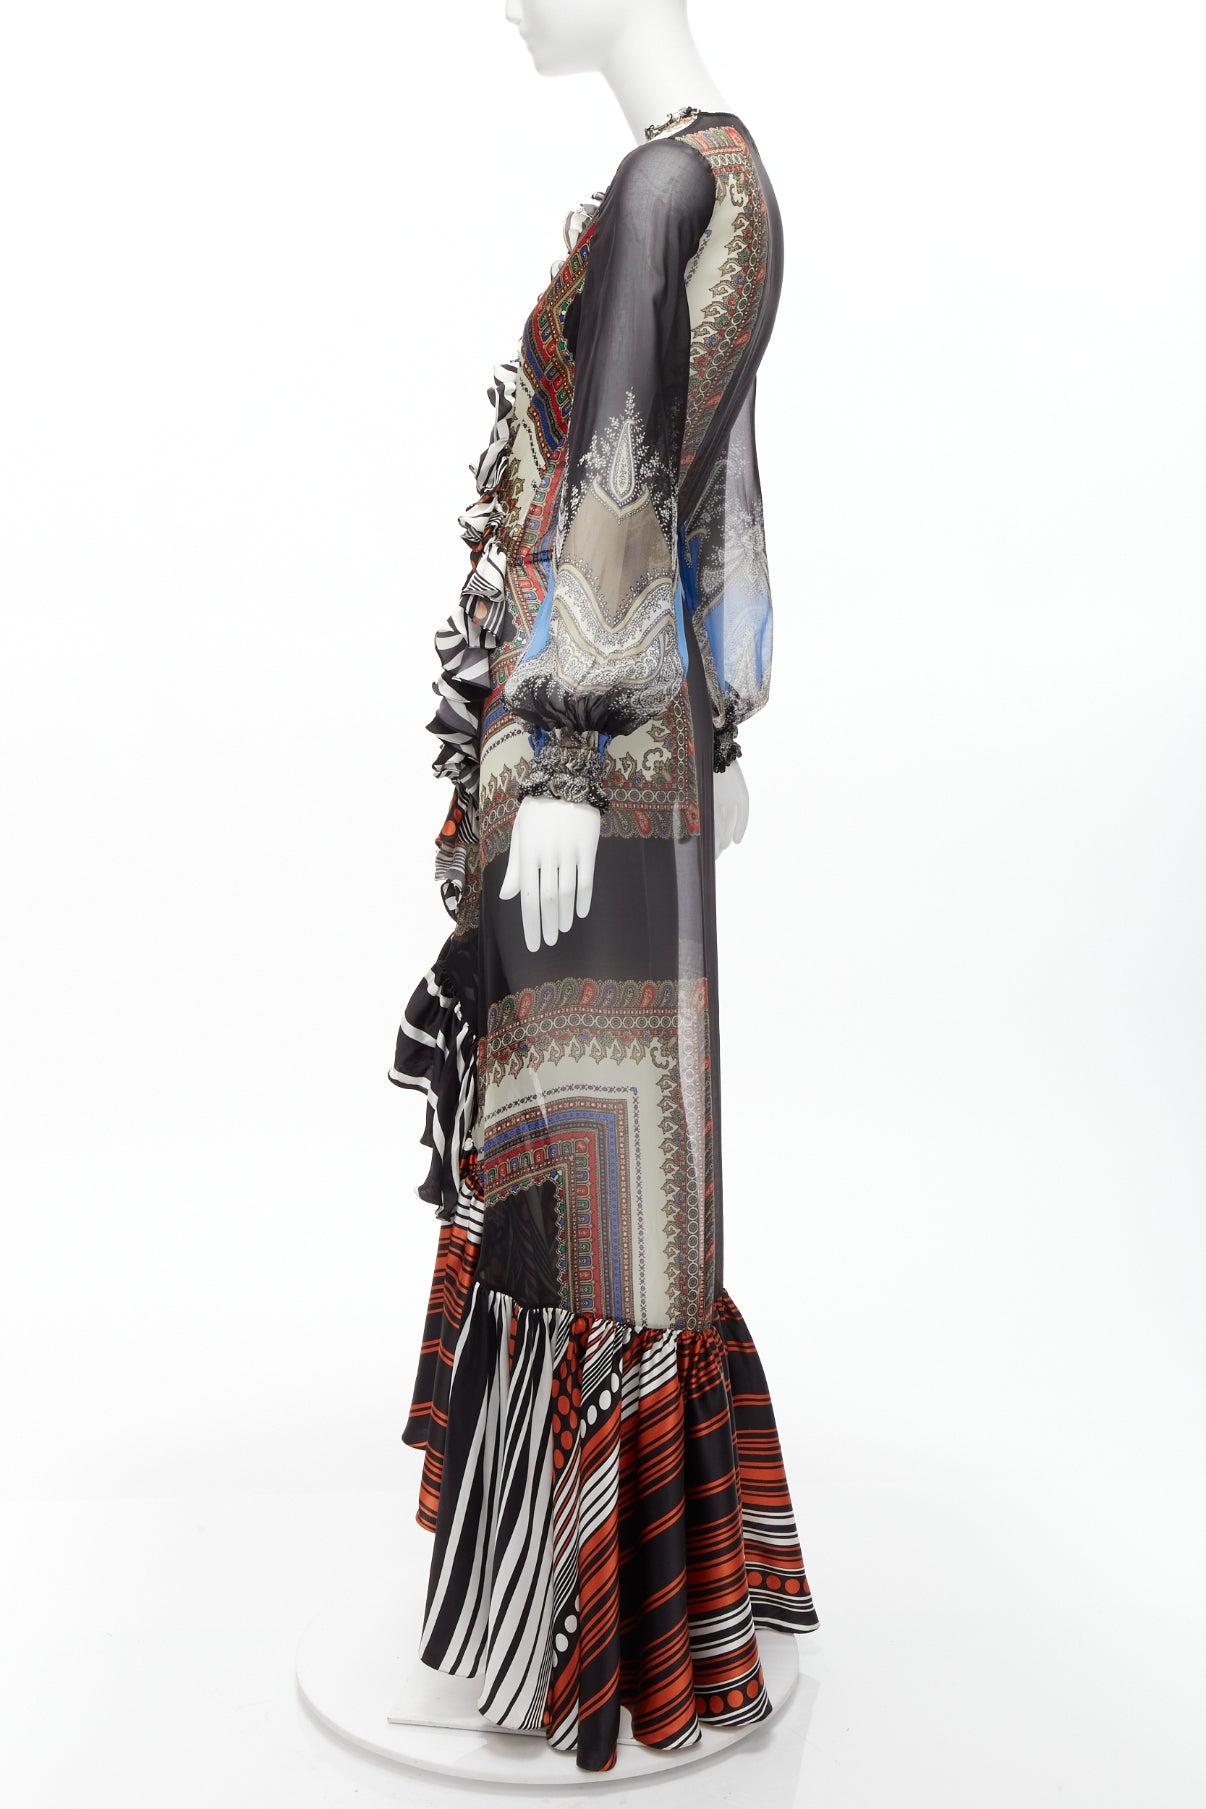 GIVENCHY RICCARDO TISCI 2013 Runway mixed print sheer ruffle gown dress FR38 M For Sale 1